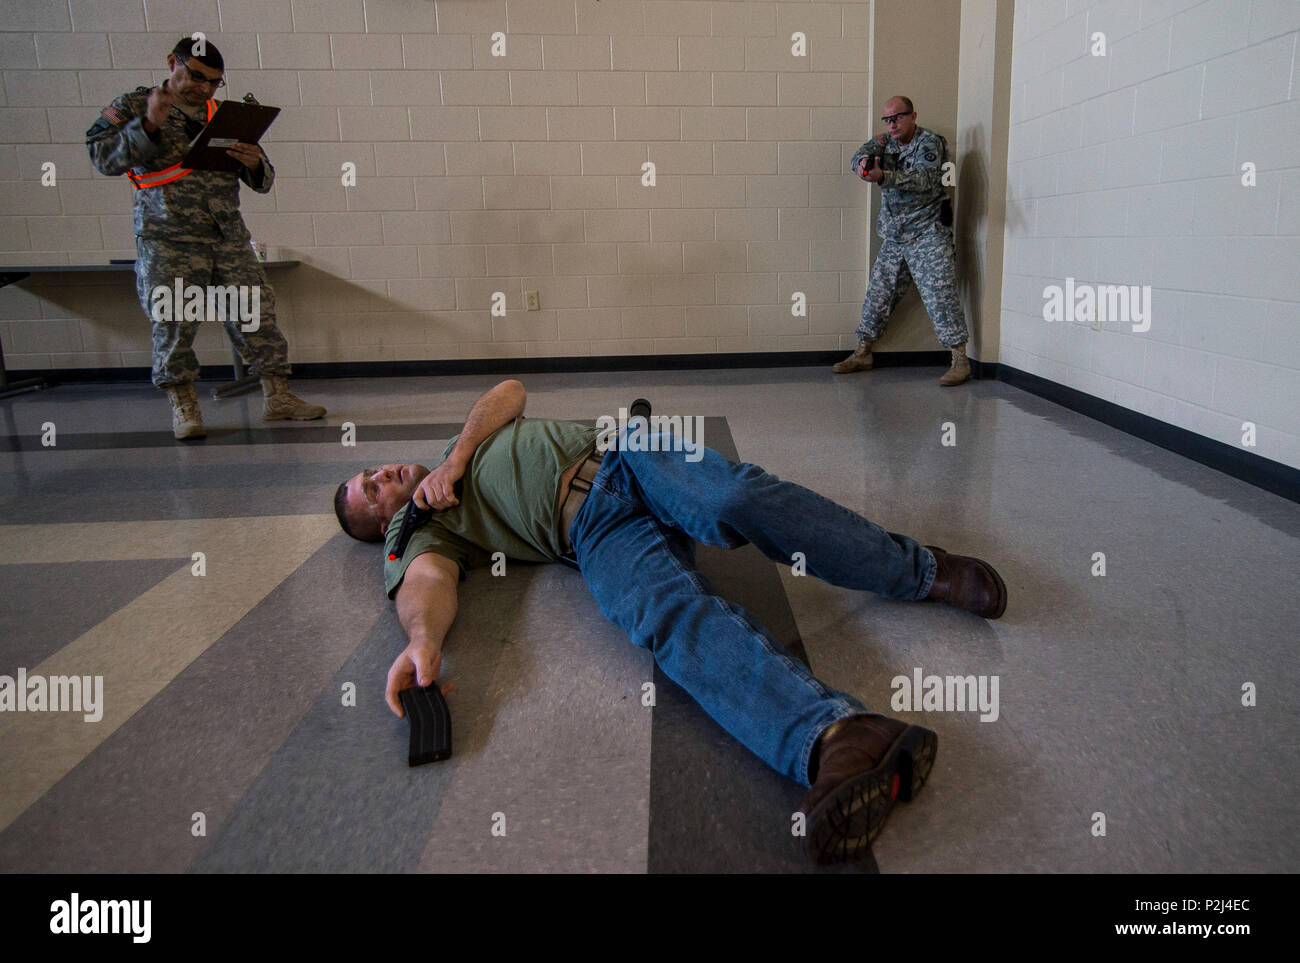 Capt. Andrew Callanan, a U.S. Army Reserve military police officer with the 535th Military Police Battalion, of Cary, North Carolina, pulls security on a suspect during the Active Shooter Threat Response Training taught at an Army Reserve installation in Nashville, Tennessee, on Sept. 27-29. This training is the first program in the Army Reserve to use the latest tactics taught by federal agents to defend against active shooter incidents, which will eventually train all military police armed guards across the 200th Military Police Command. (U.S. Army Reserve photo by Master Sgt. Michel Sauret) Stock Photo